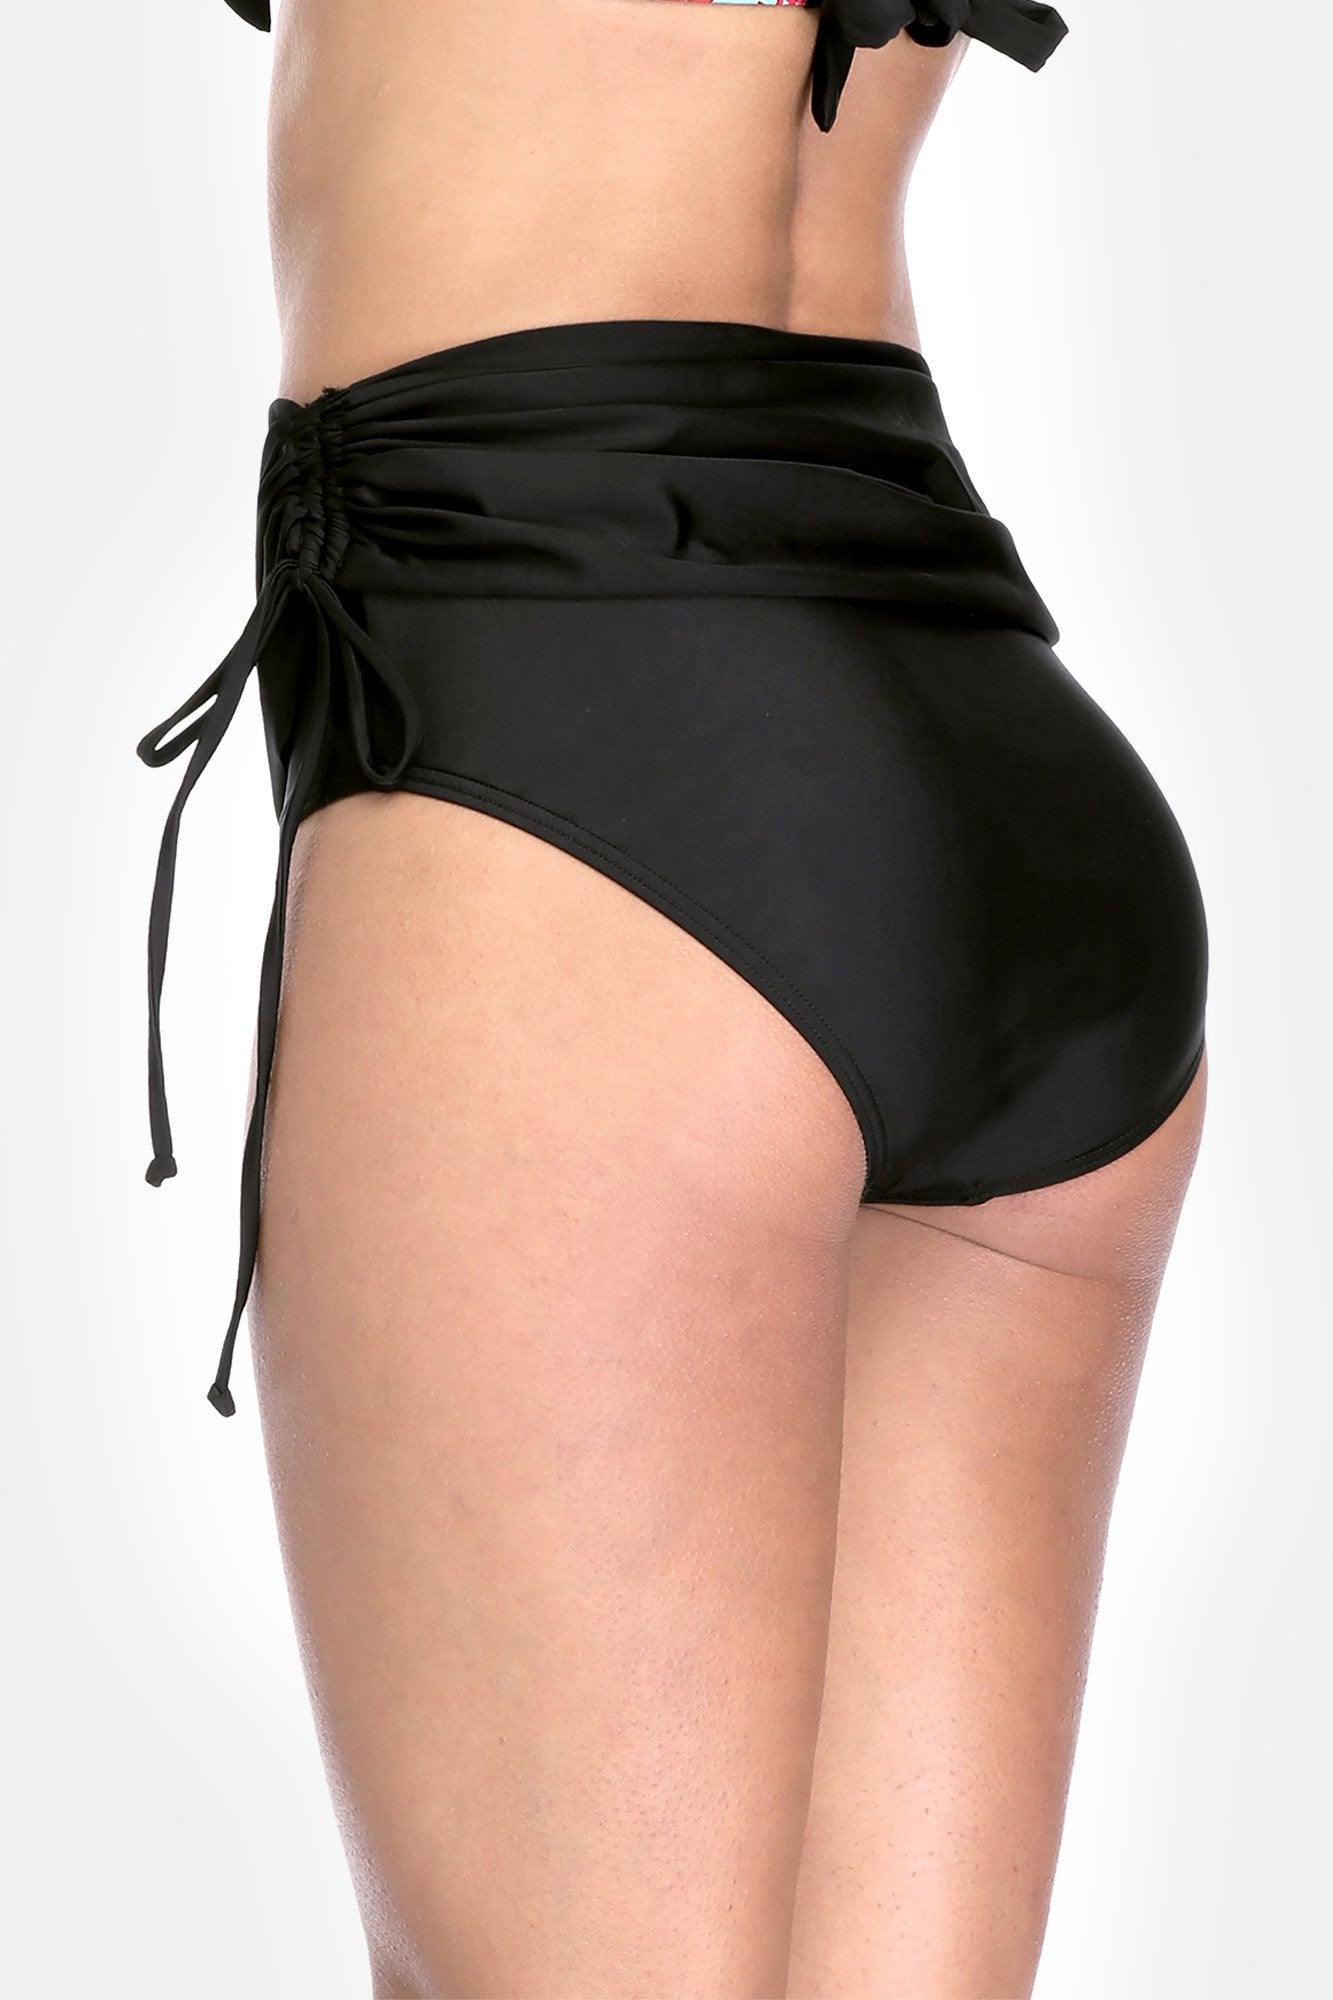 Attraco Women's Swimsuit Plus Size High Waist Shorts-Attraco | Fashion Outdoor Clothing